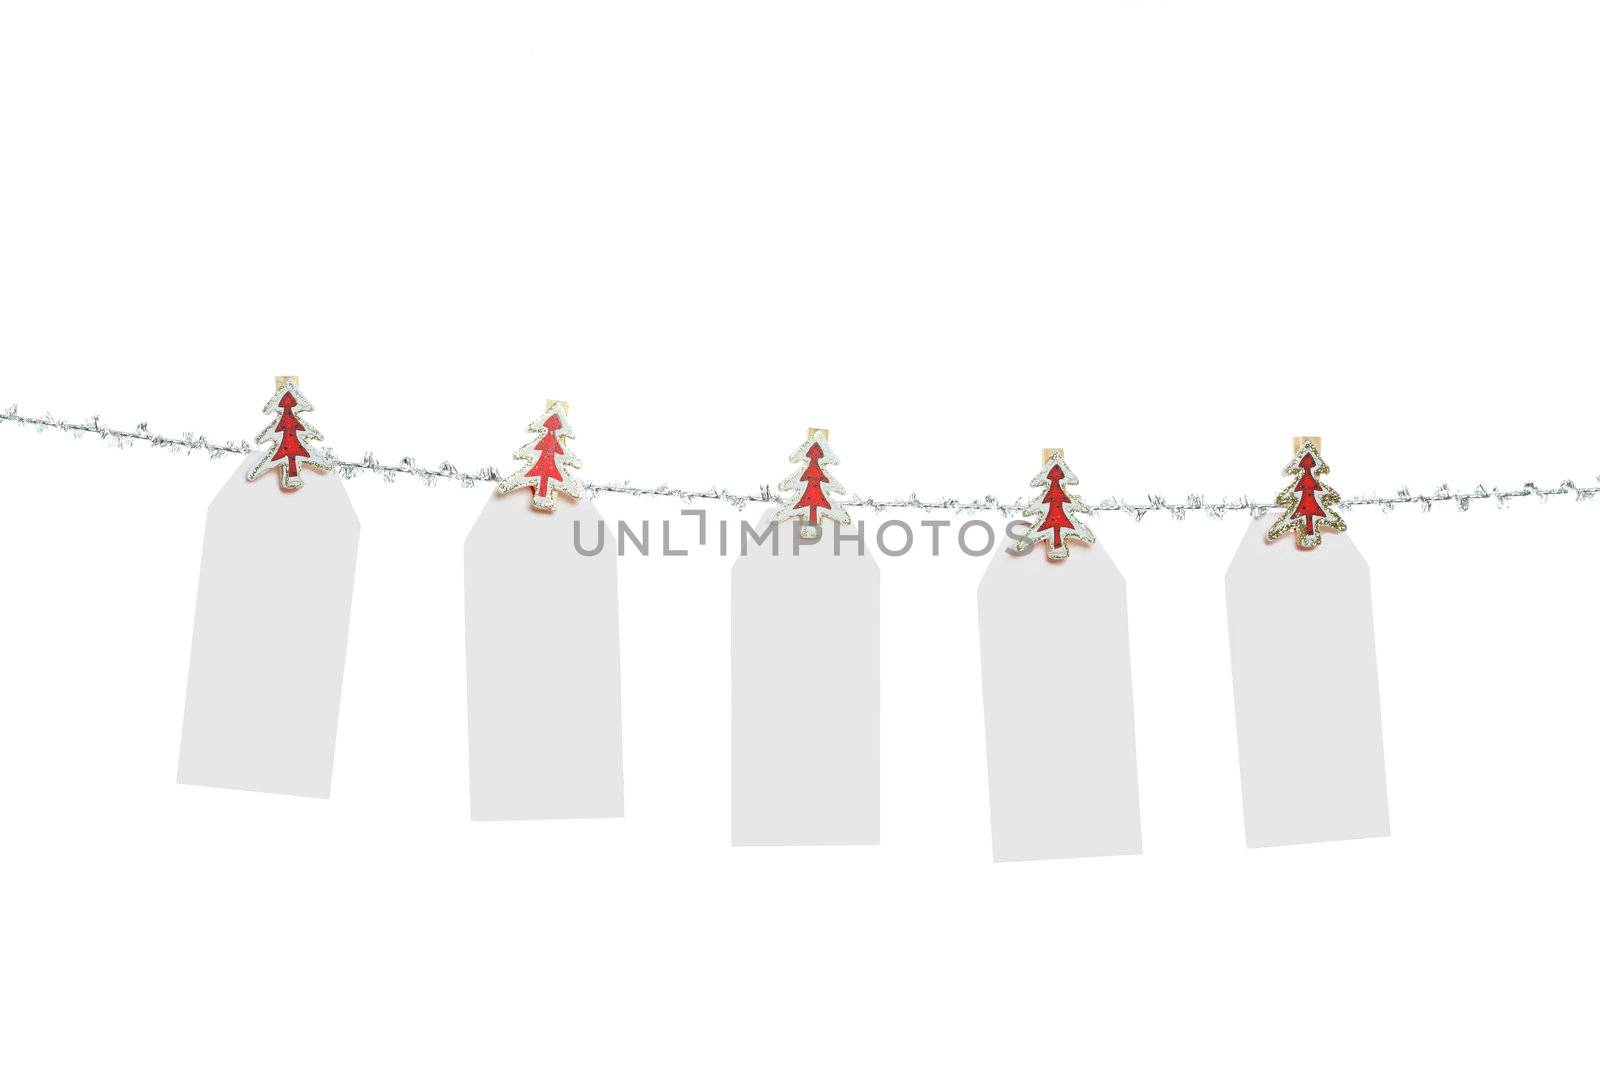 Five blank Christmas tags pegged to a silver tinsel string  line - ready for your own text or message.